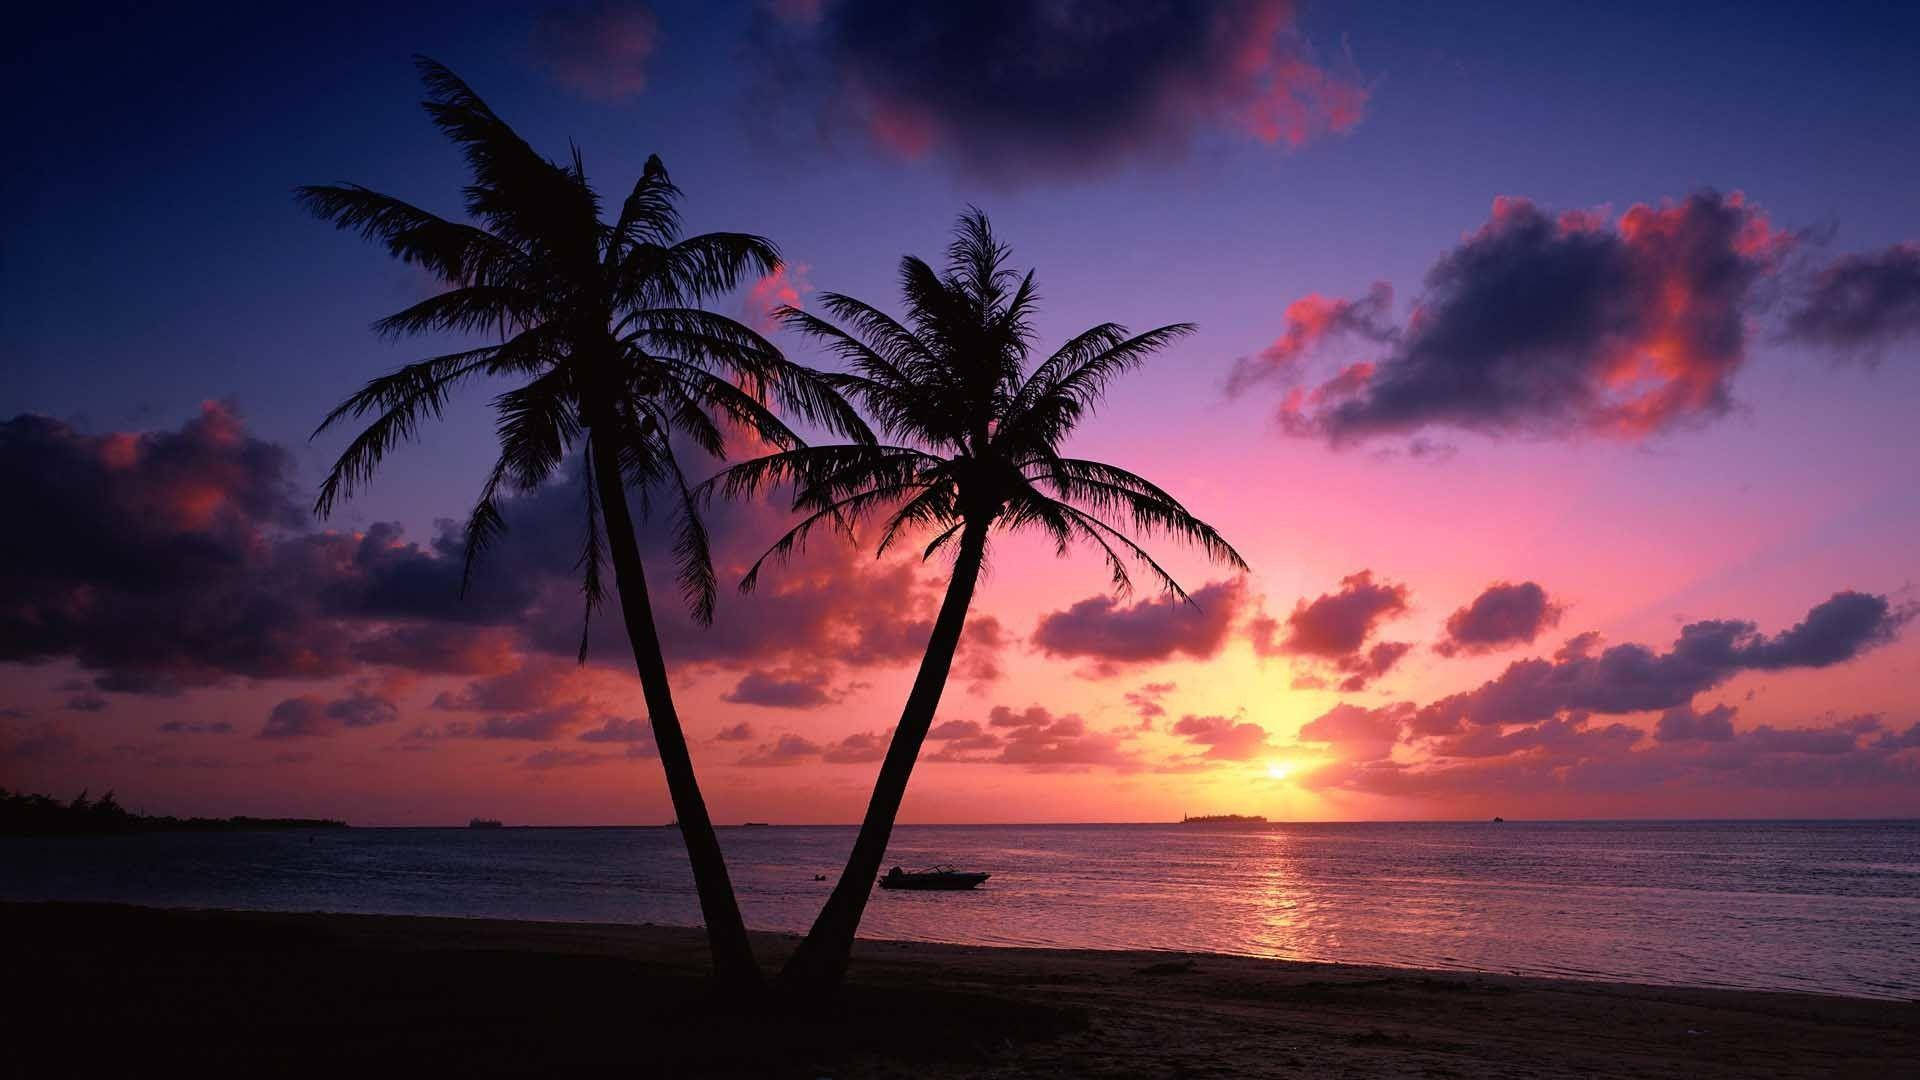 Aesthetic Sunset With Palm Tree Silhouettes Background